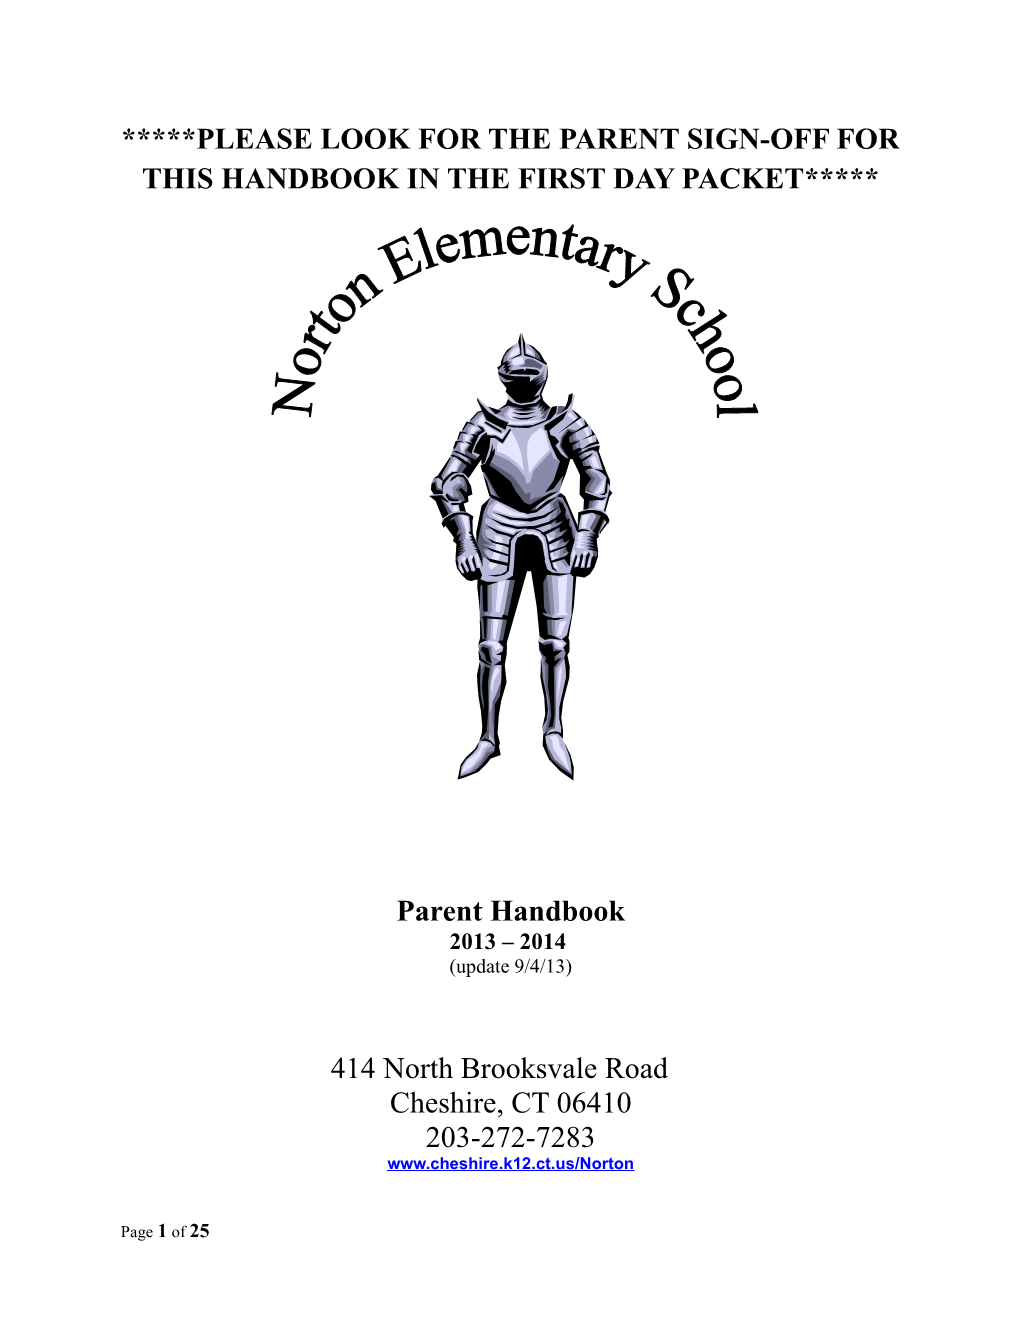 Please Look for the Parent Sign-Off for This Handbook in the First Day Packet